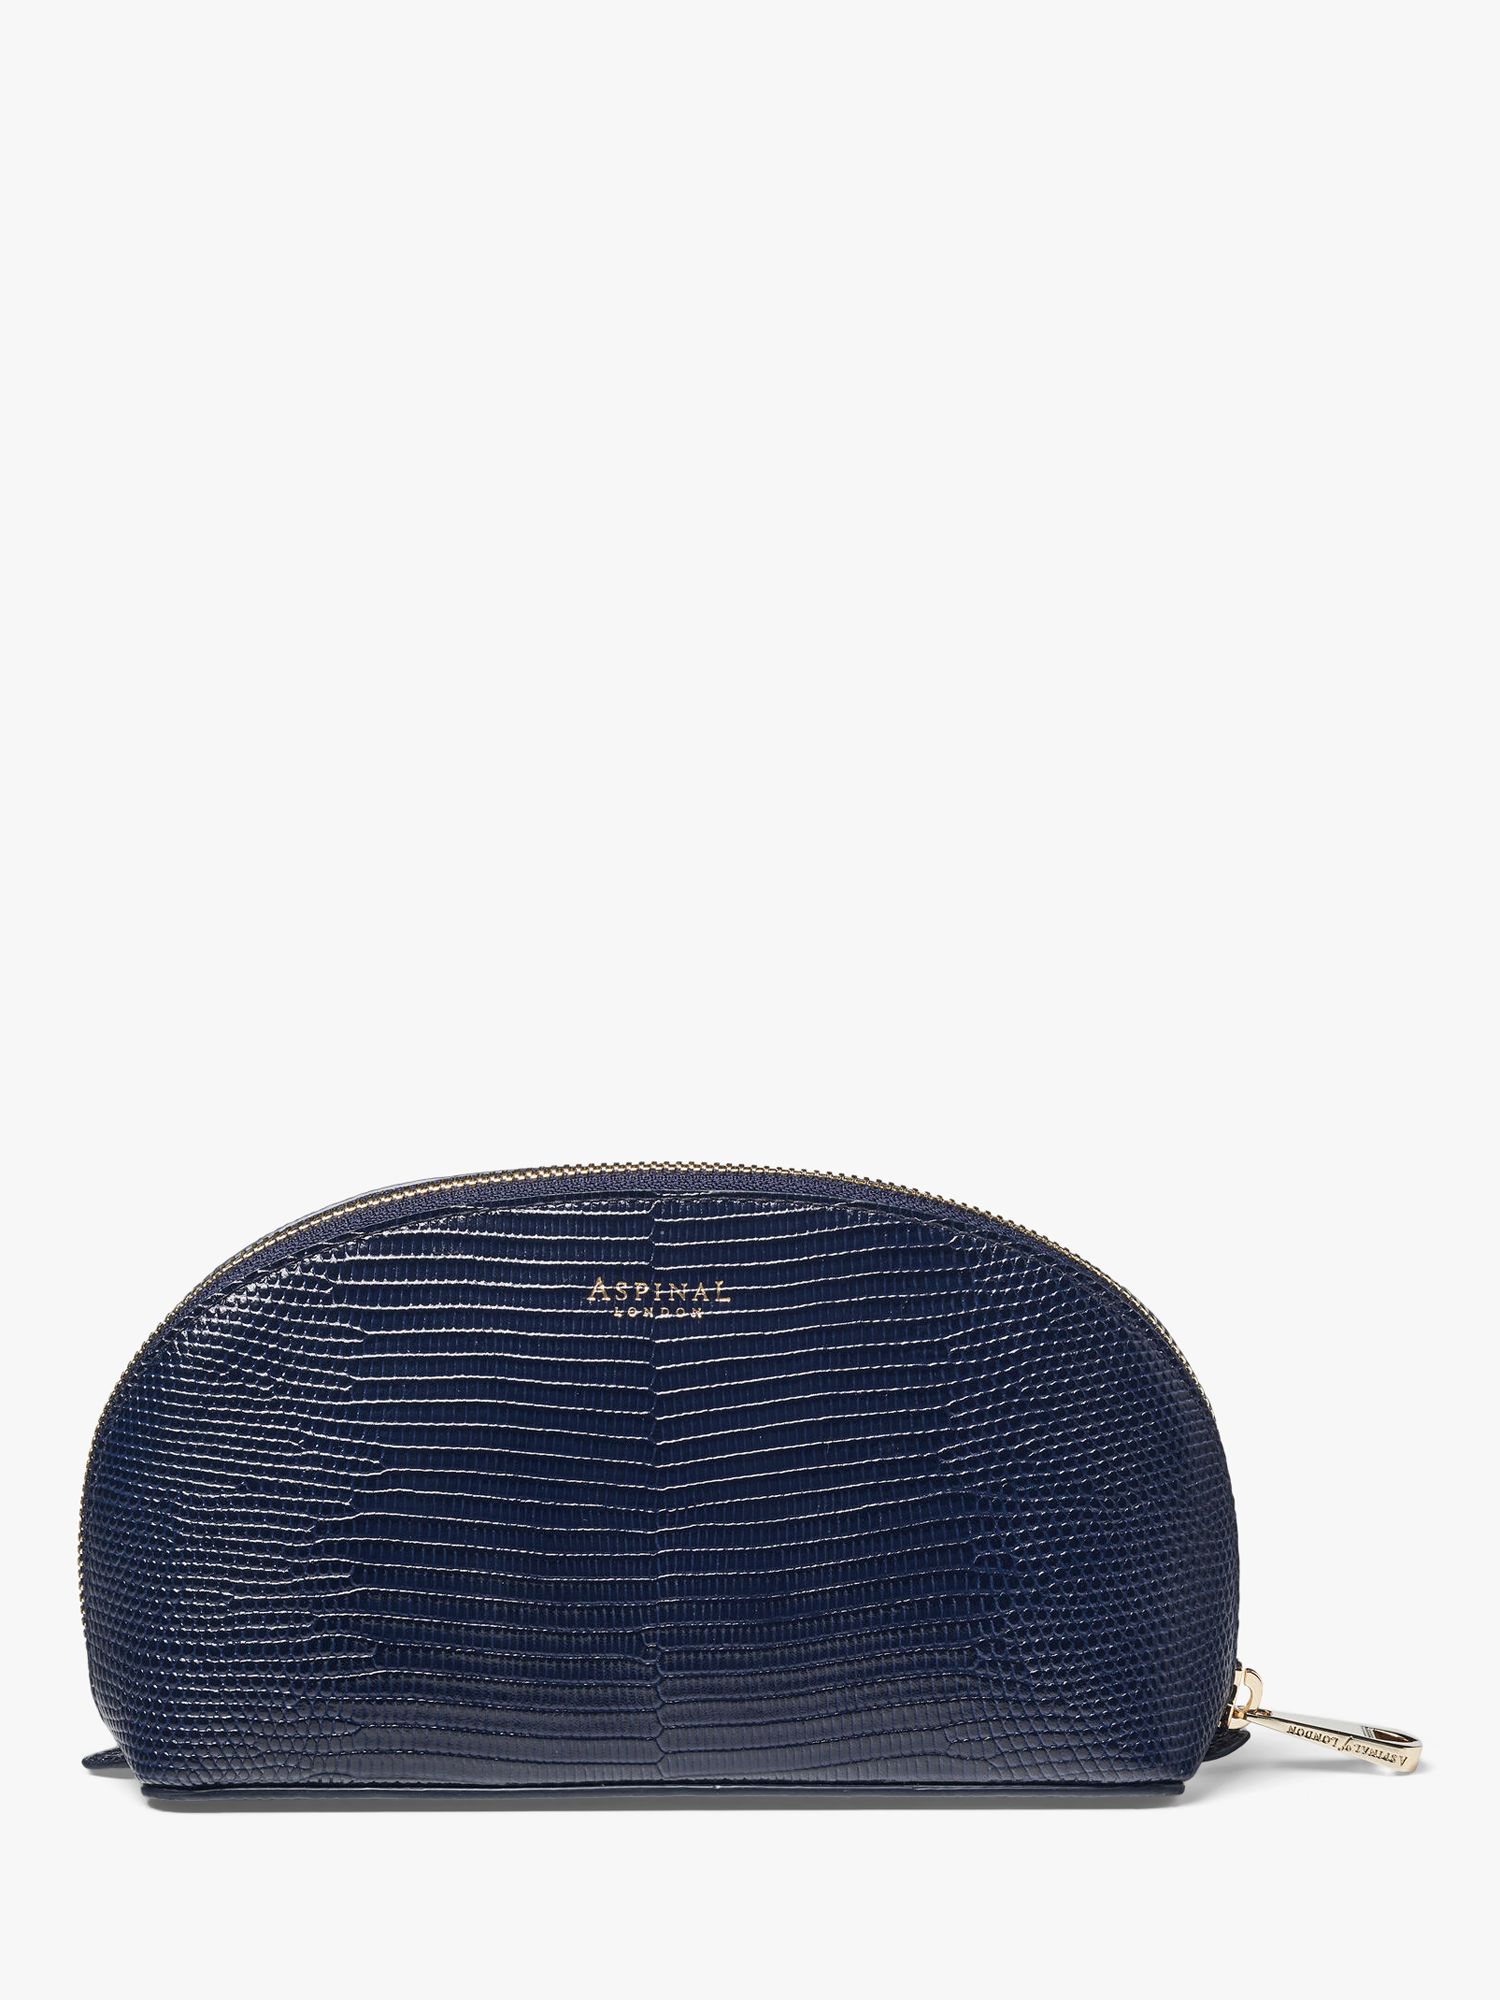 Aspinal of London Madsion Small Leather Cosmetic Case, Midnight Lizard 2